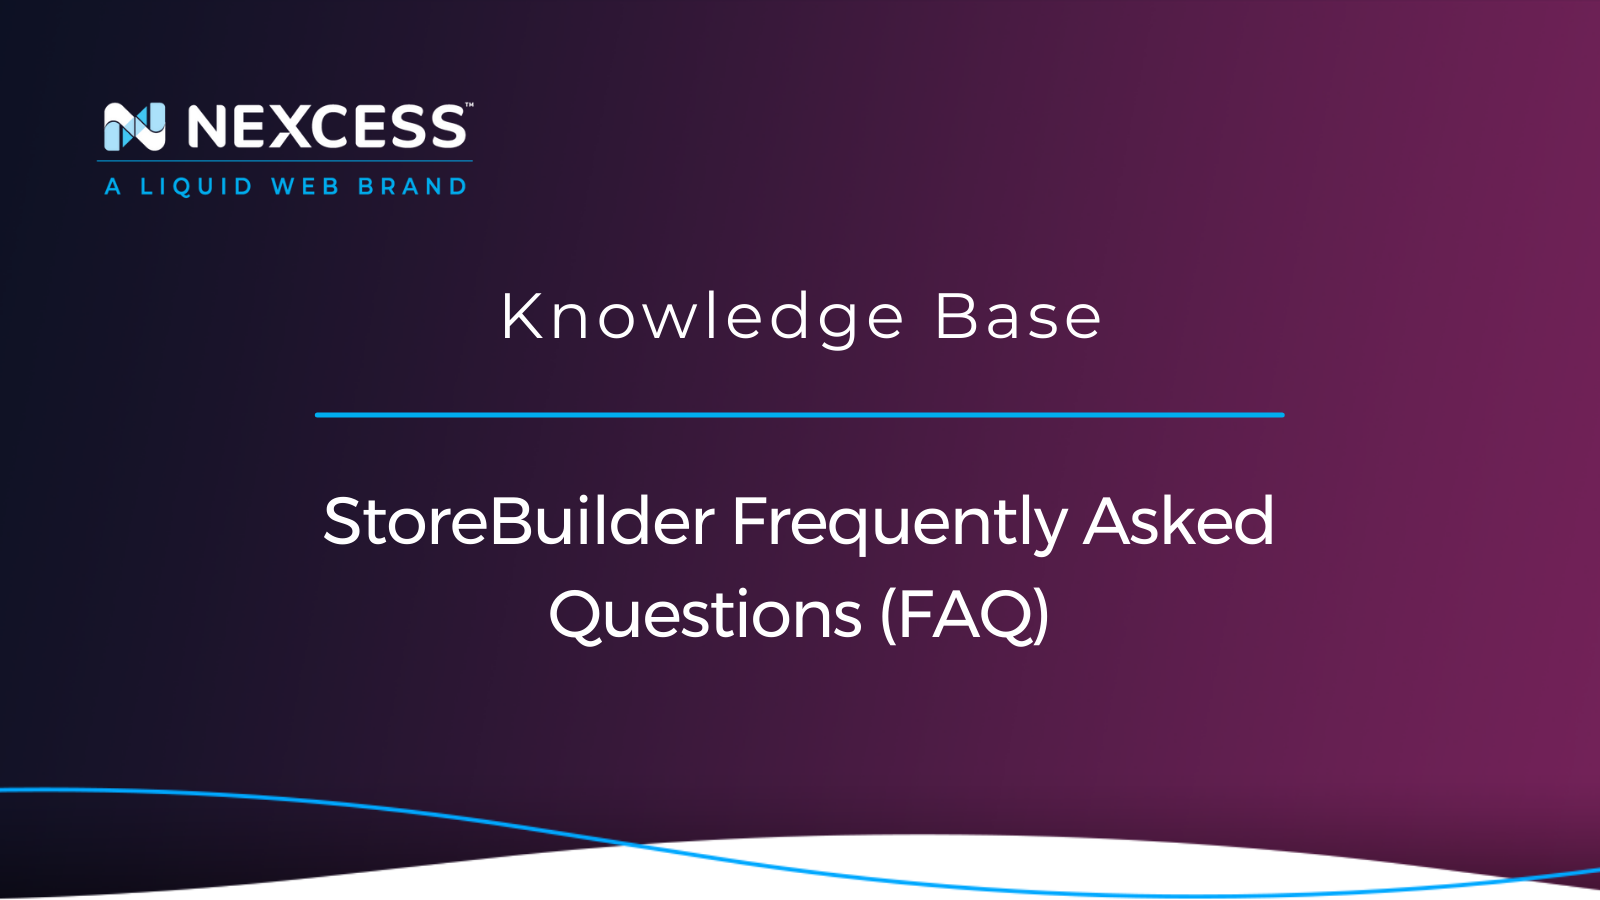 StoreBuilder Frequently Asked Questions (FAQ)